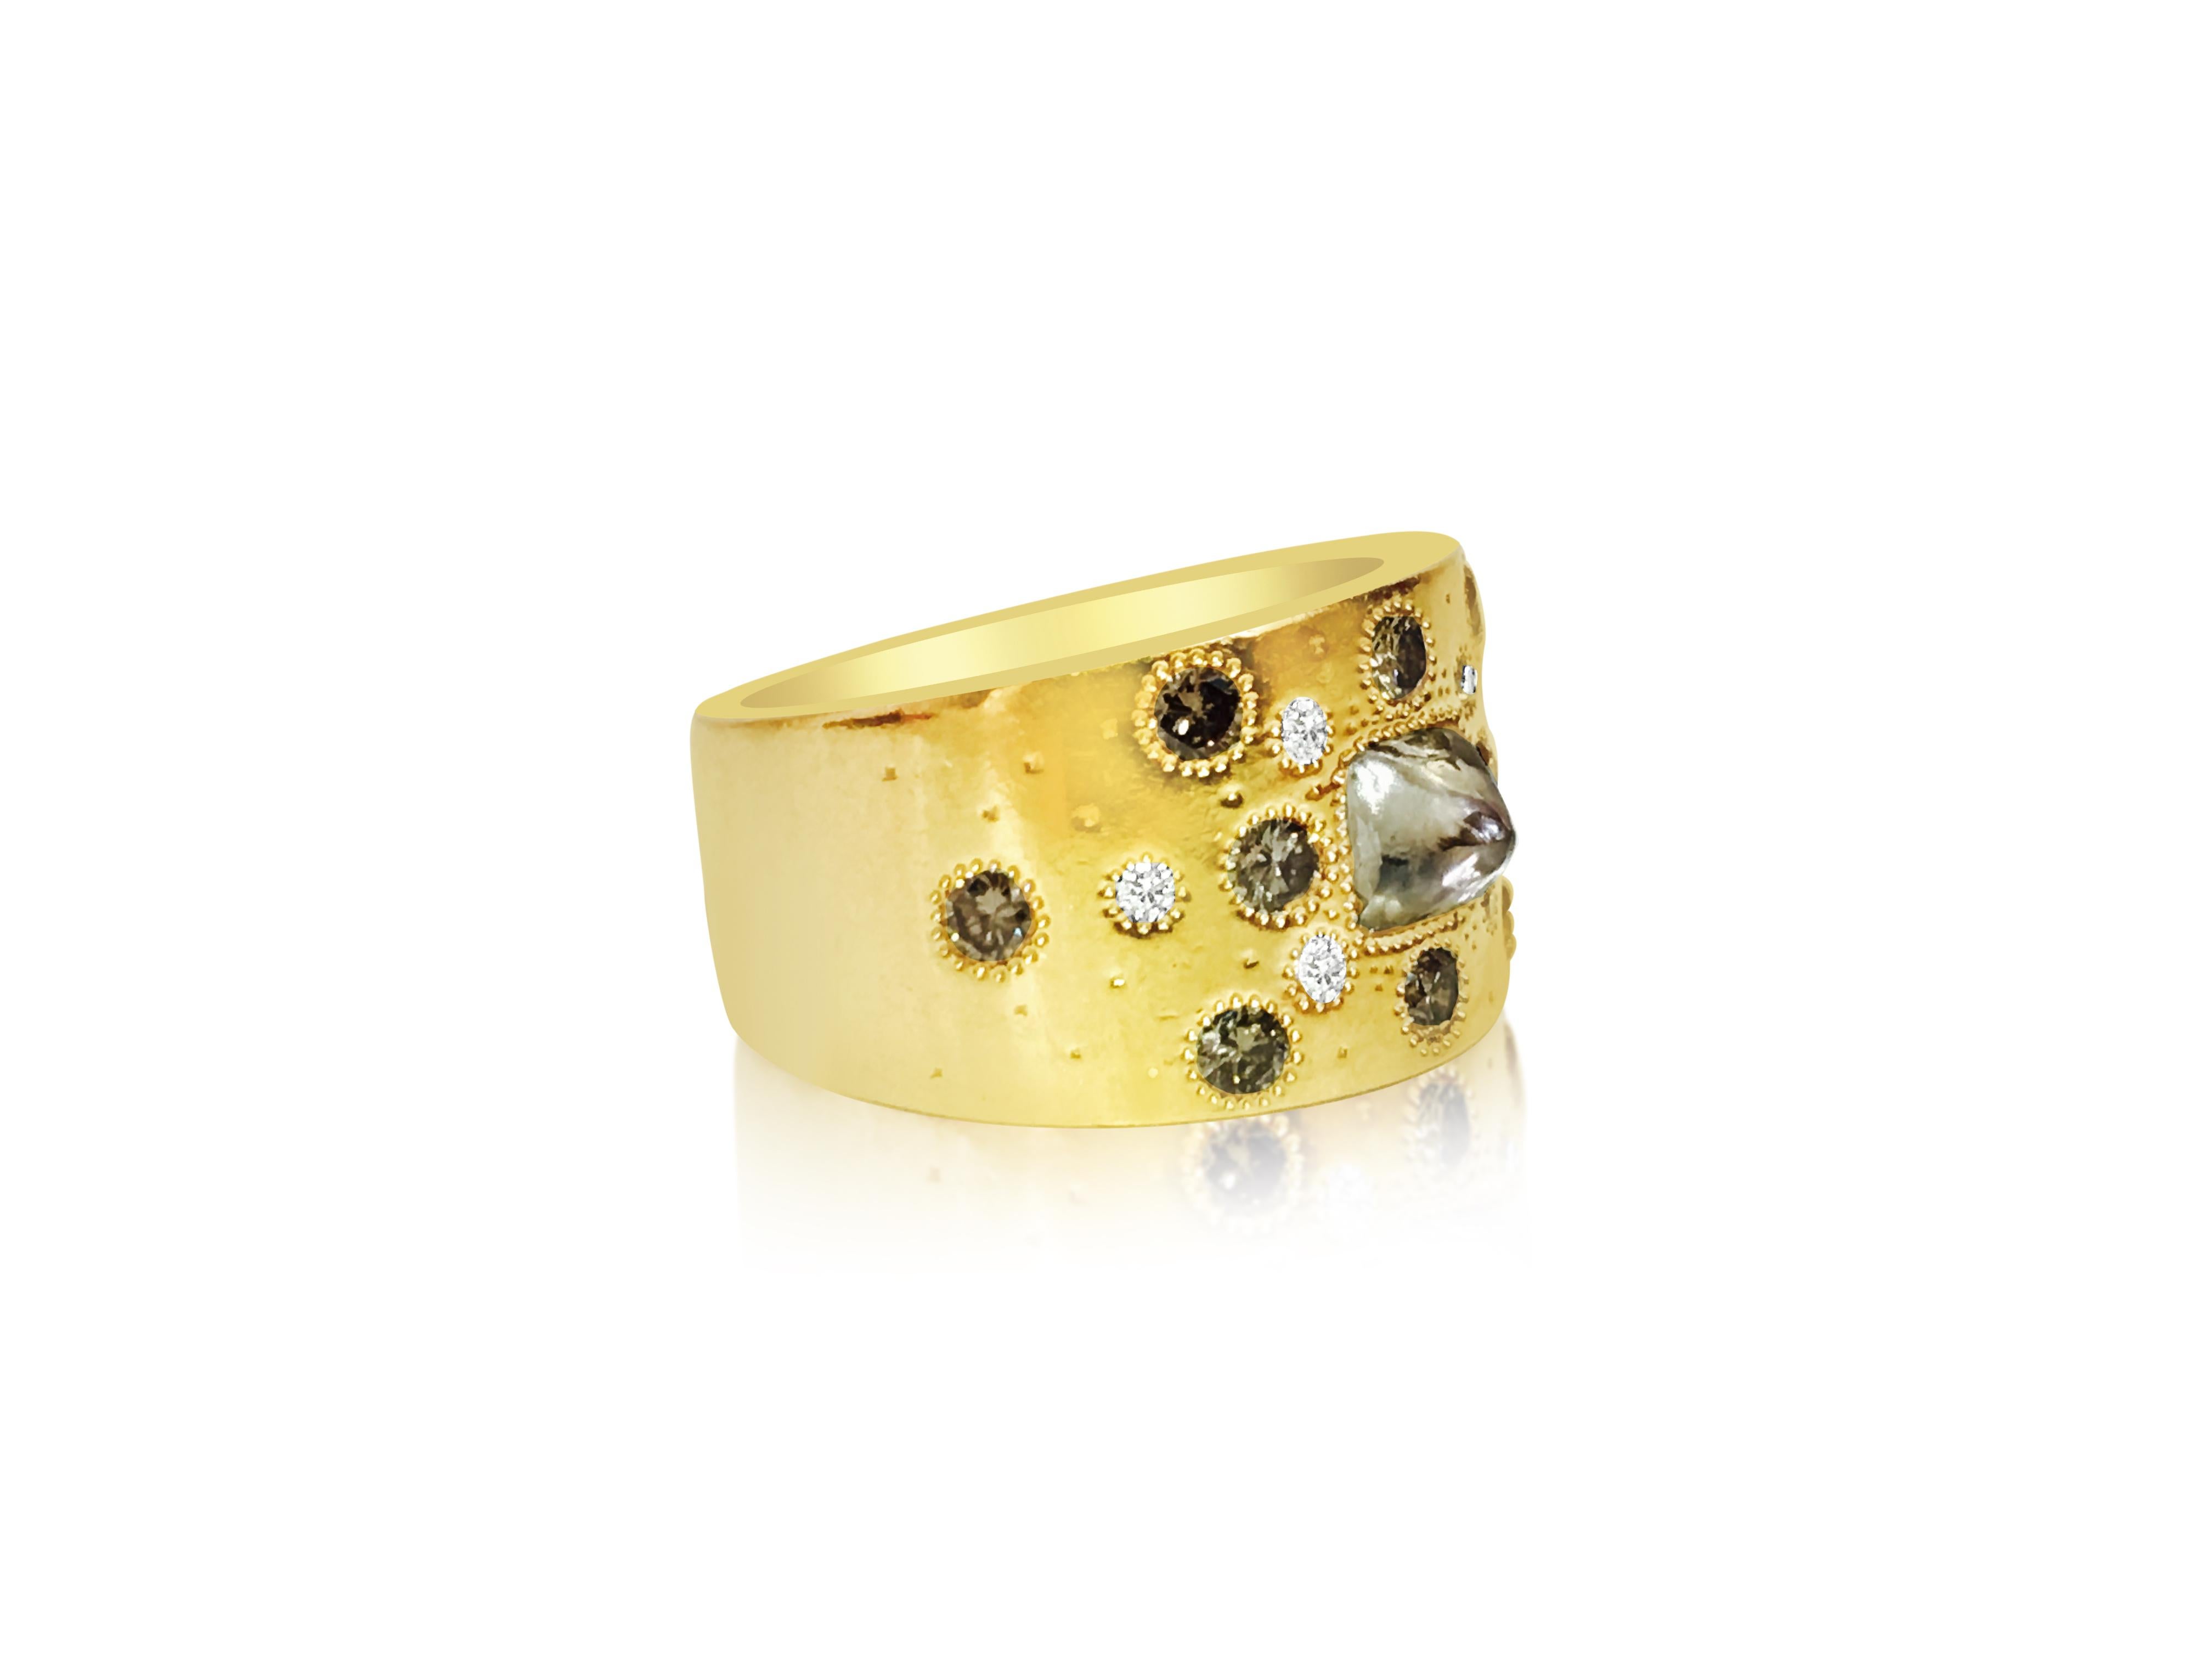 Brilliant Cut De Beers, 18K Yellow Gold & Rough Diamond Ring. For Sale